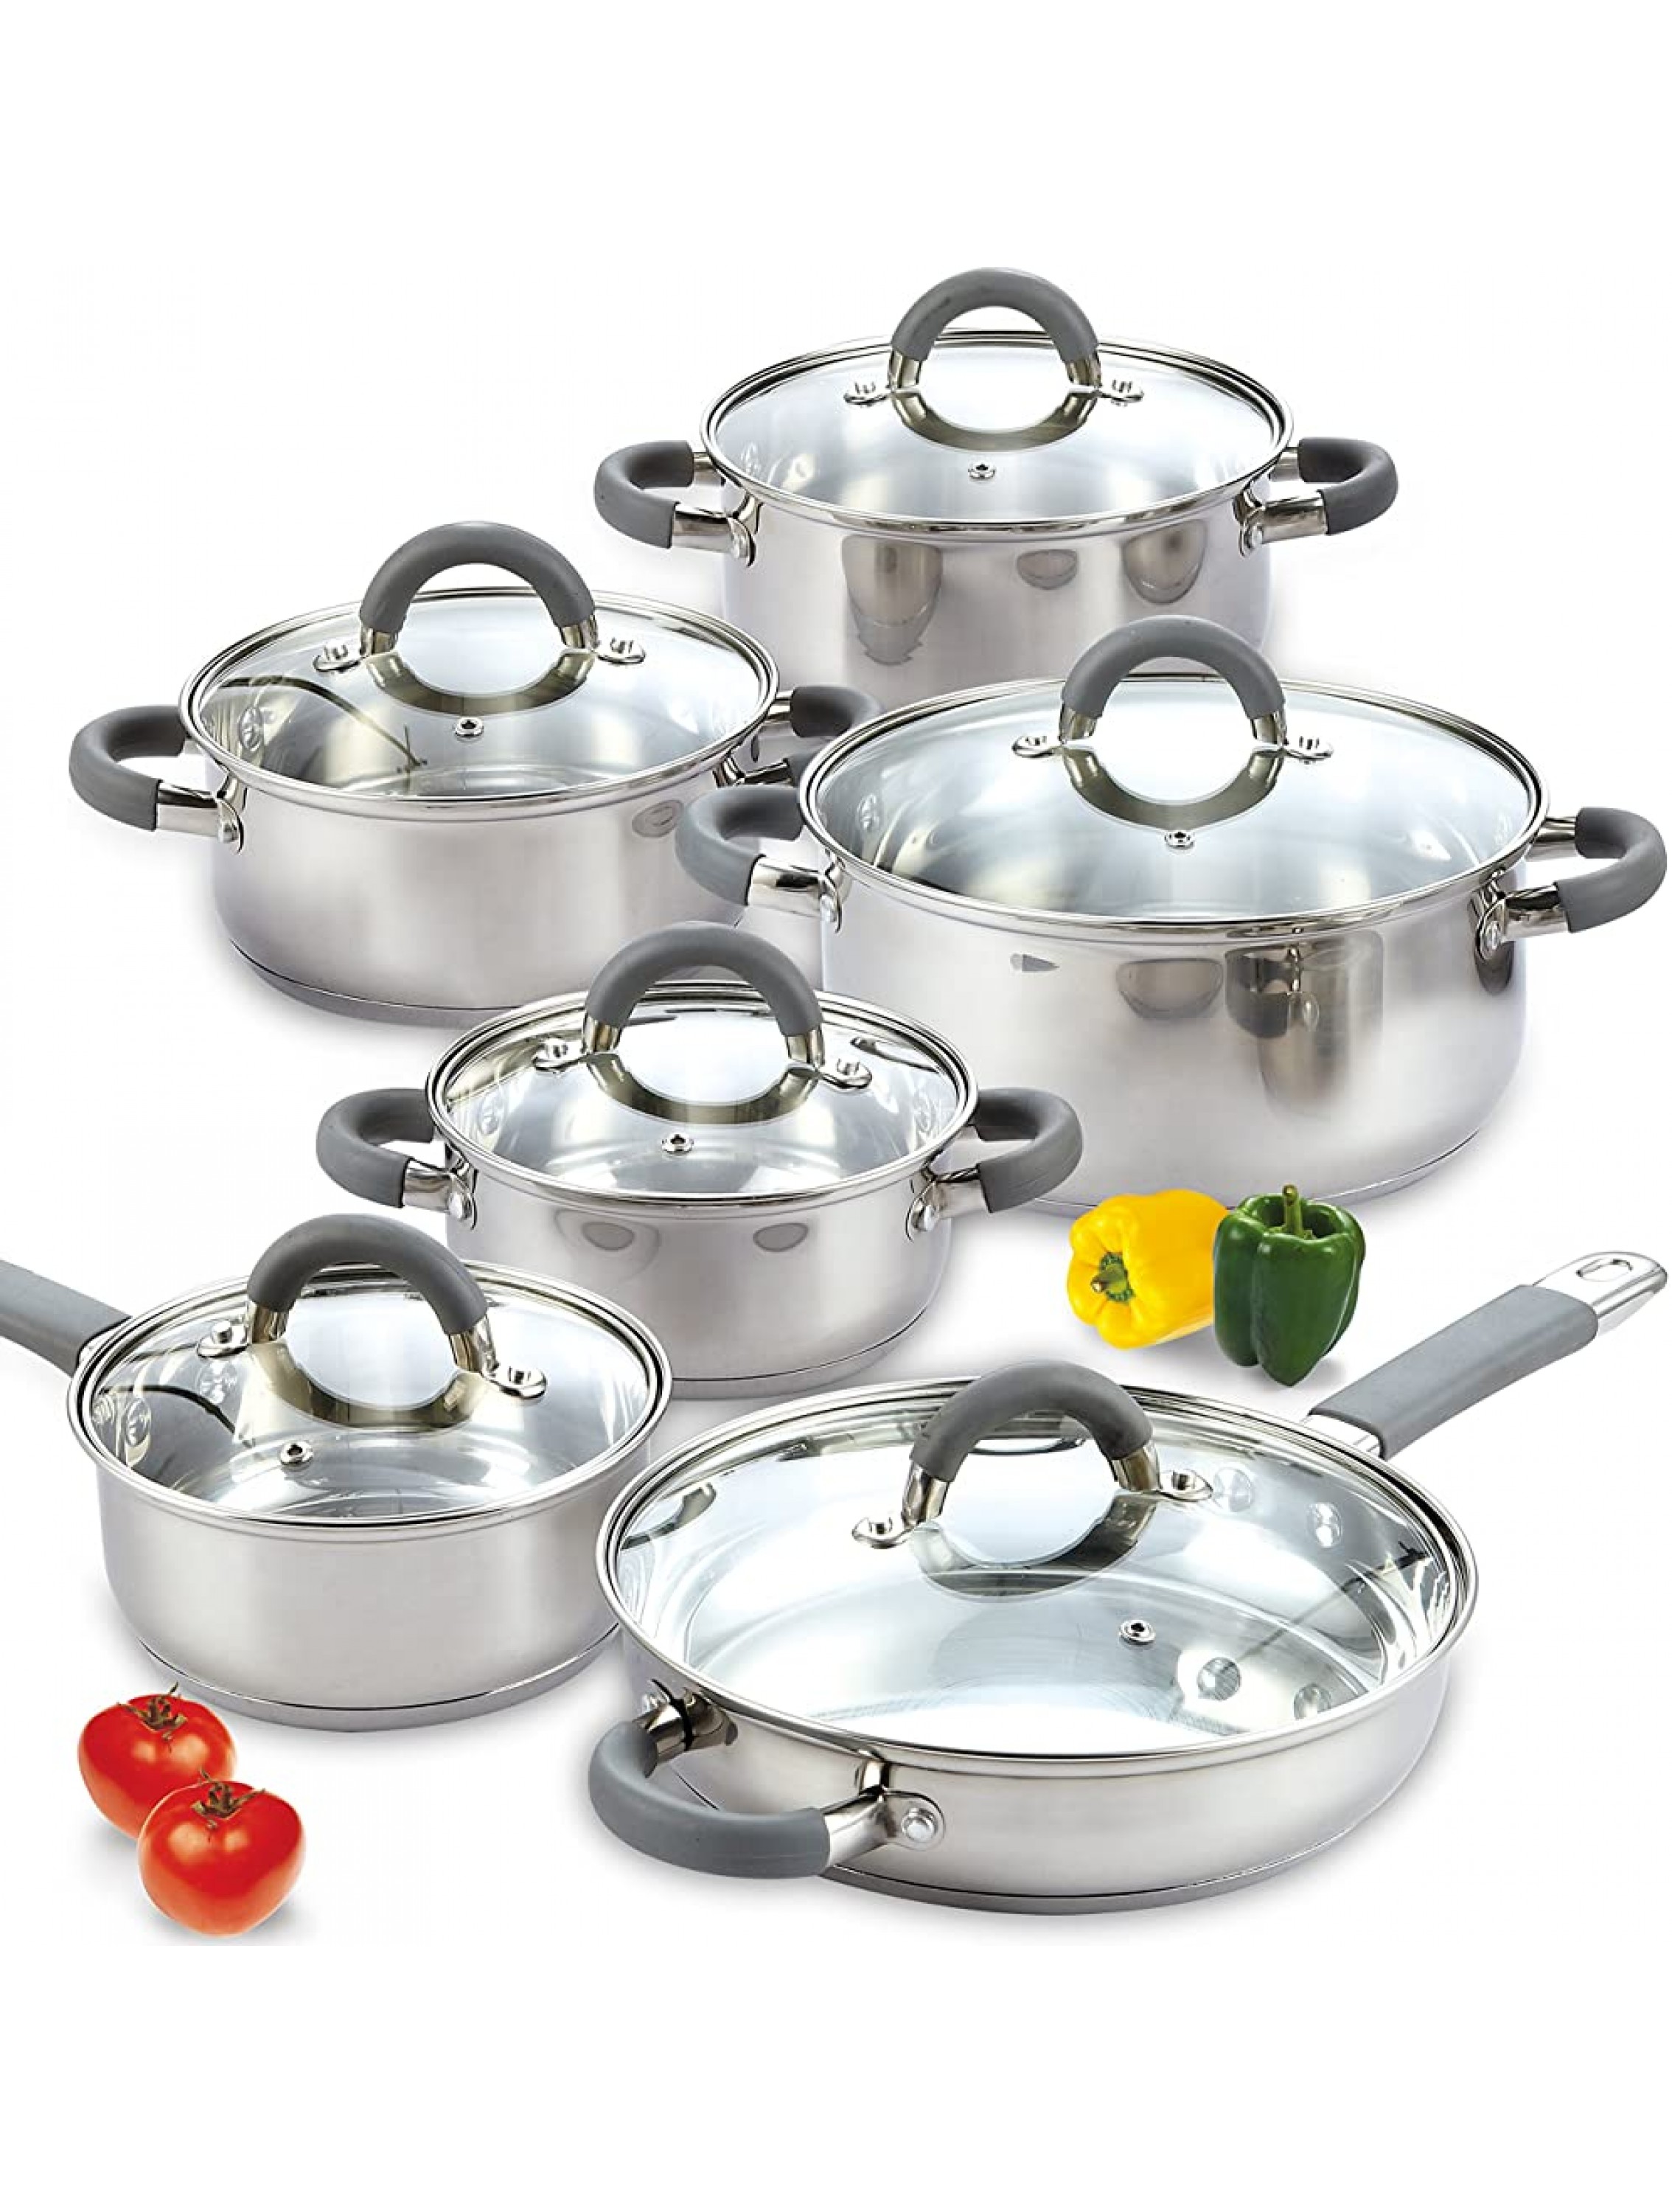 Cook N Home 2410 Stainless Steel 12-Piece Cookware Set Silver - B79F2NXGT